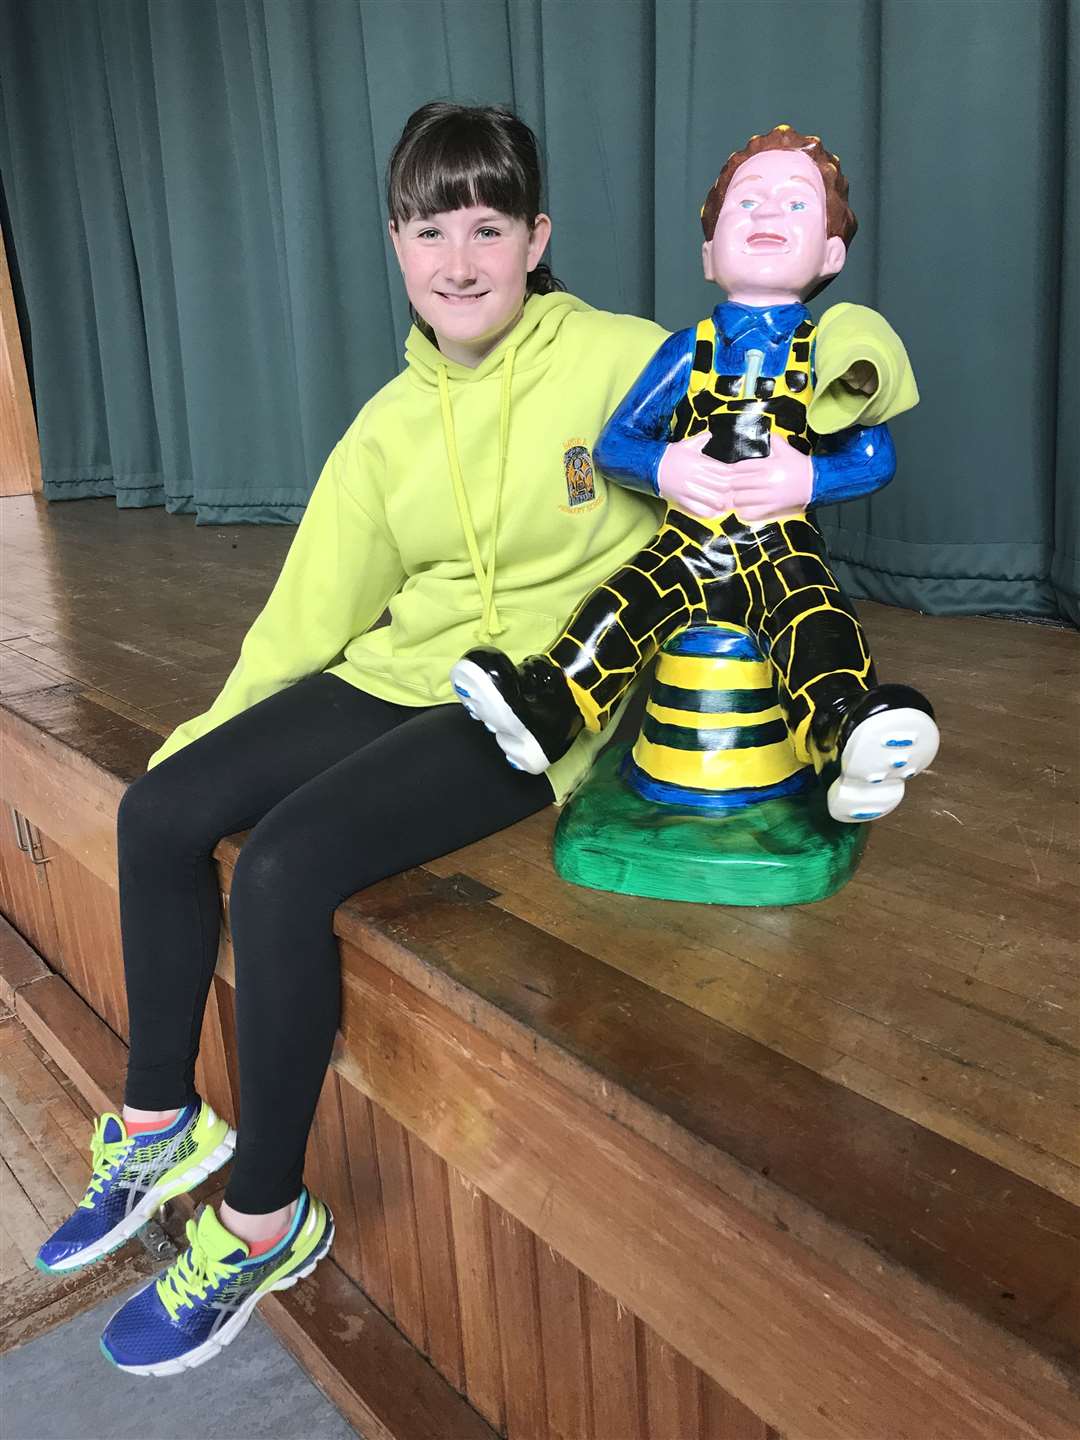 Abby Holliday with her design of Brora Boy.